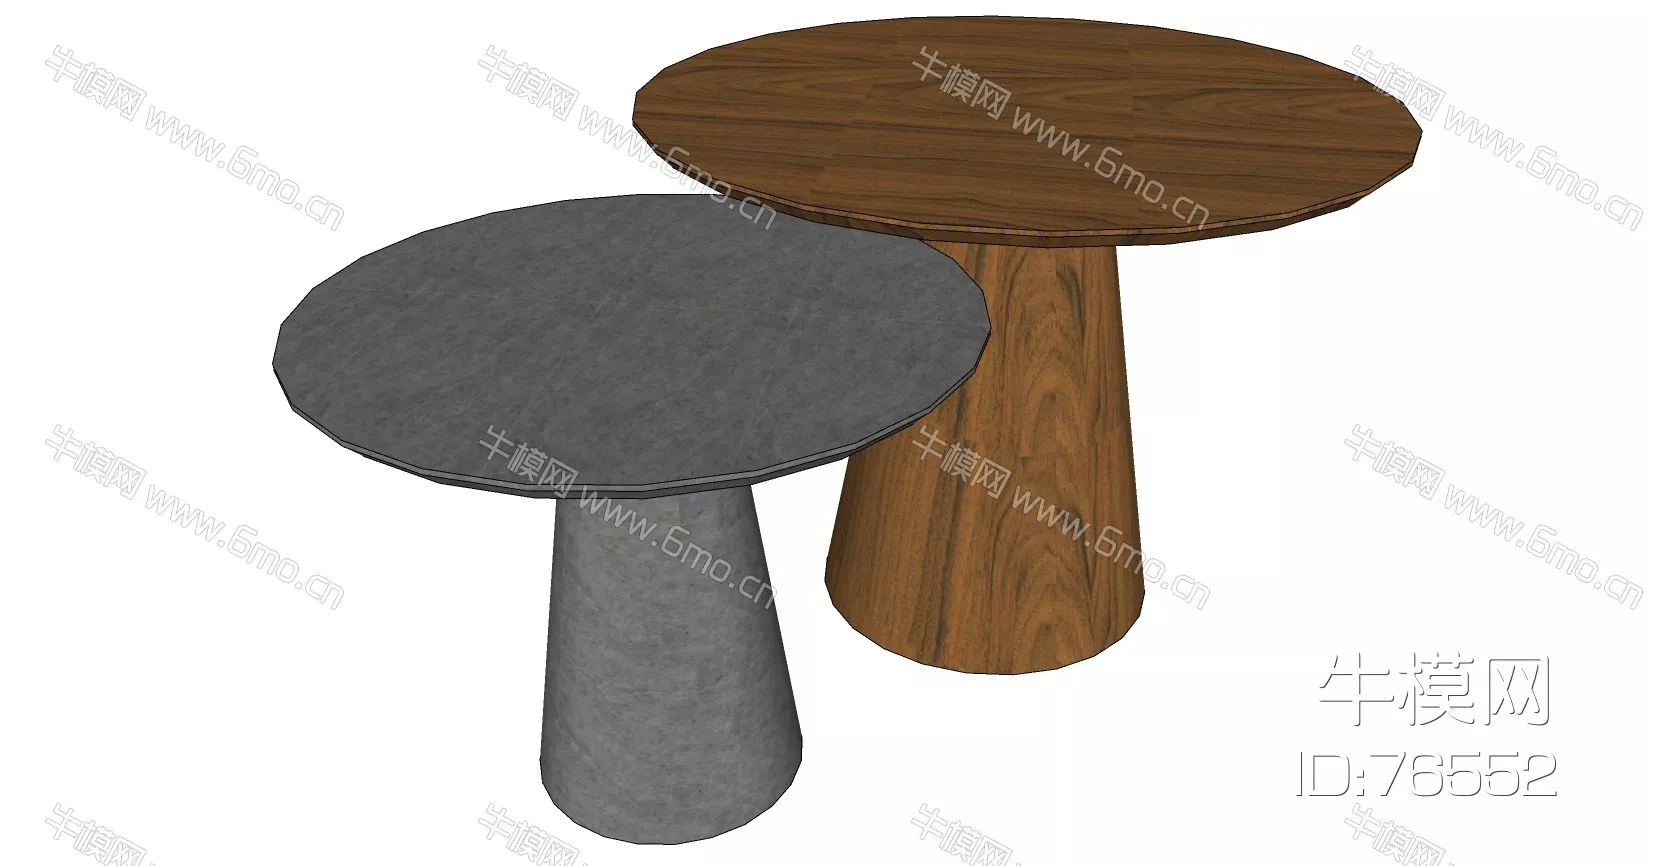 MODERN COFFEE TABLE - SKETCHUP 3D MODEL - ENSCAPE - 76552